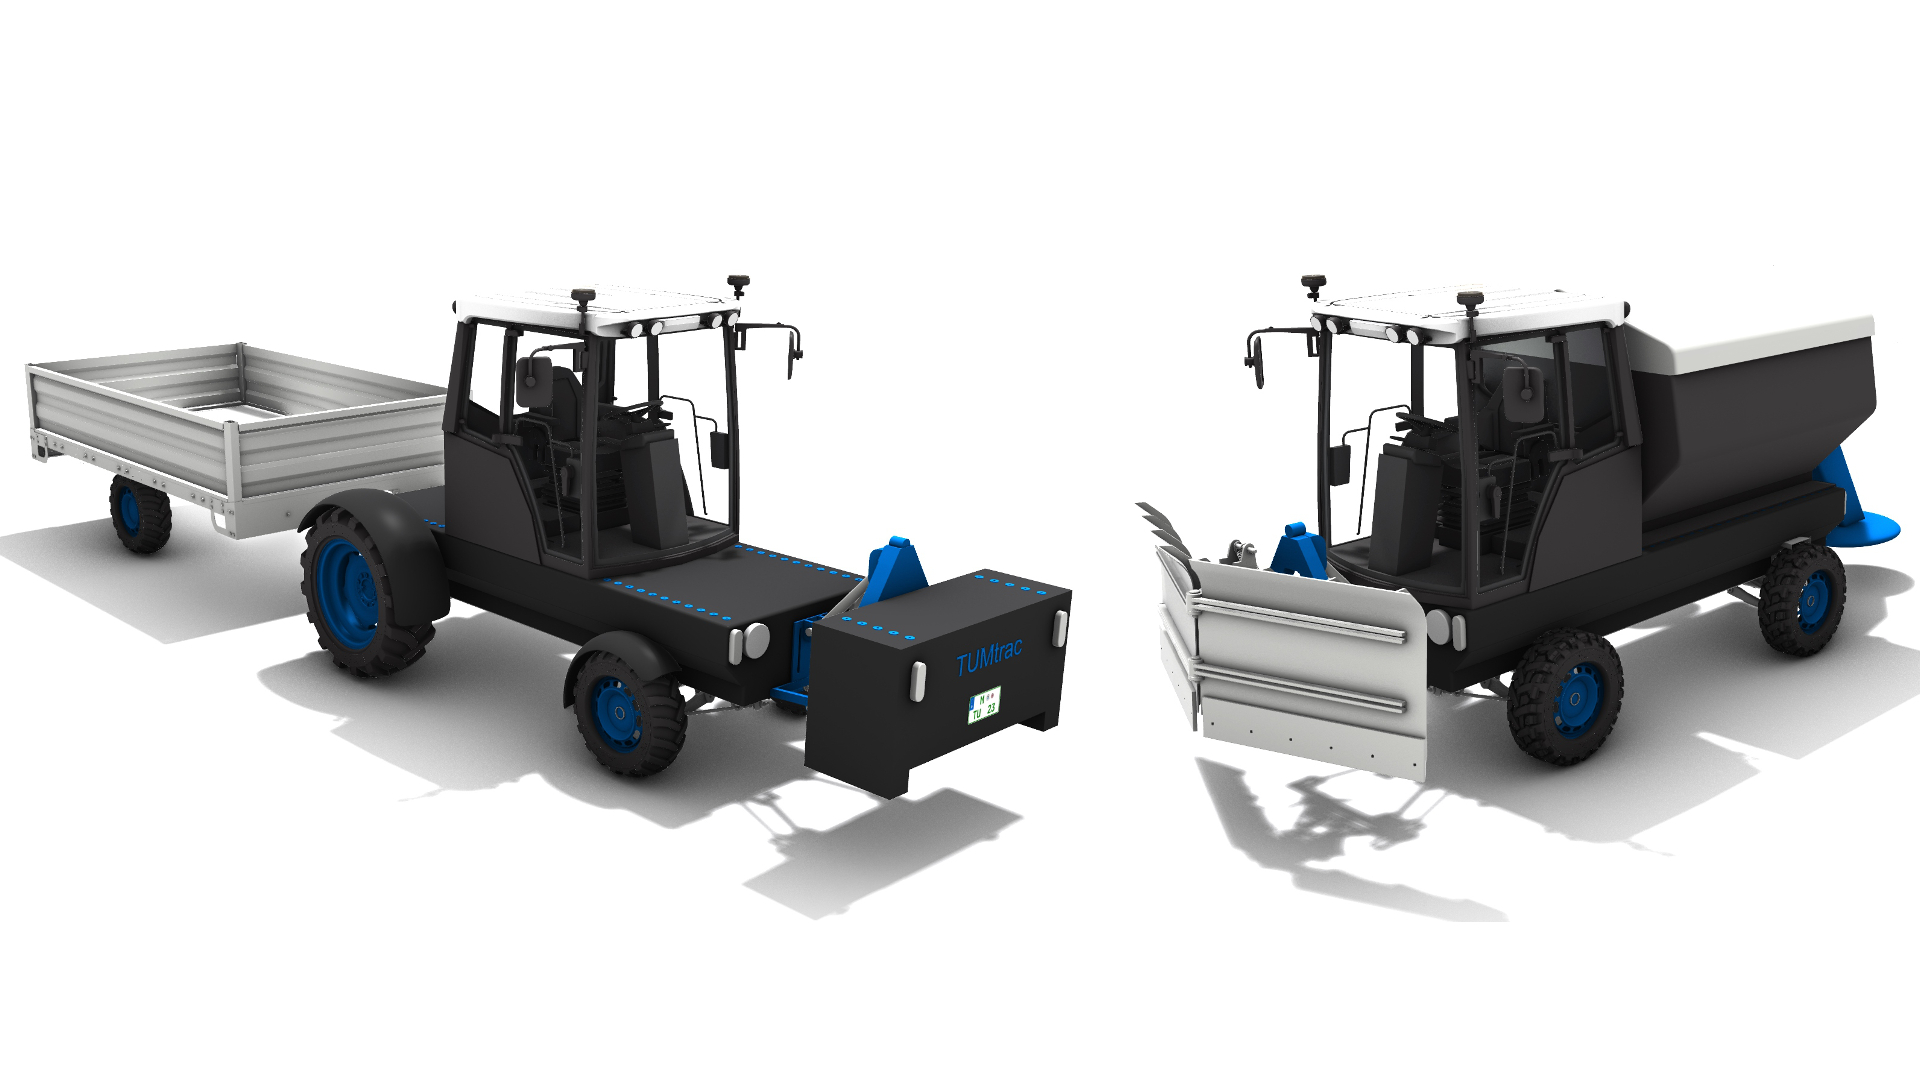 3D models of another tractor and a spreader vehicle